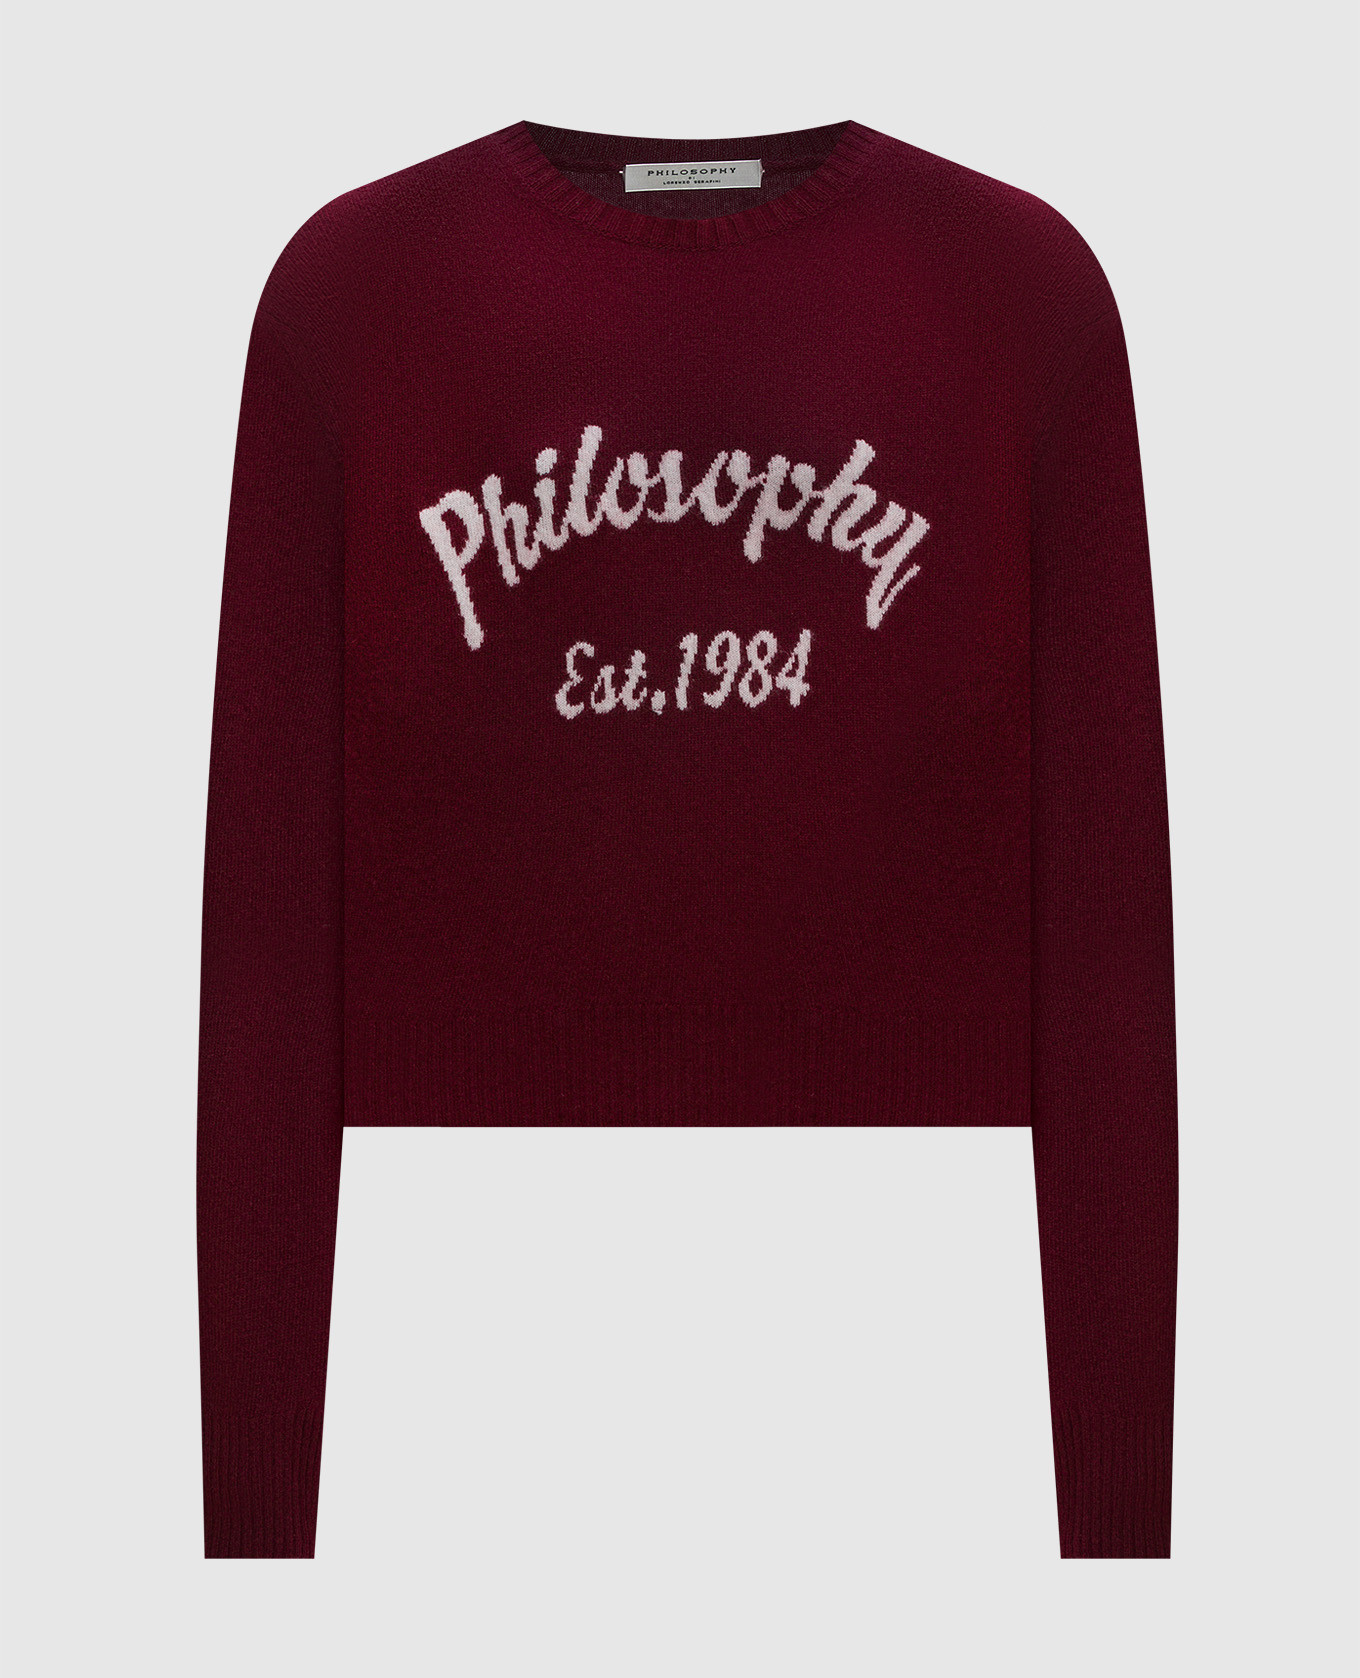 Burgundy wool and cashmere jumper with a logo